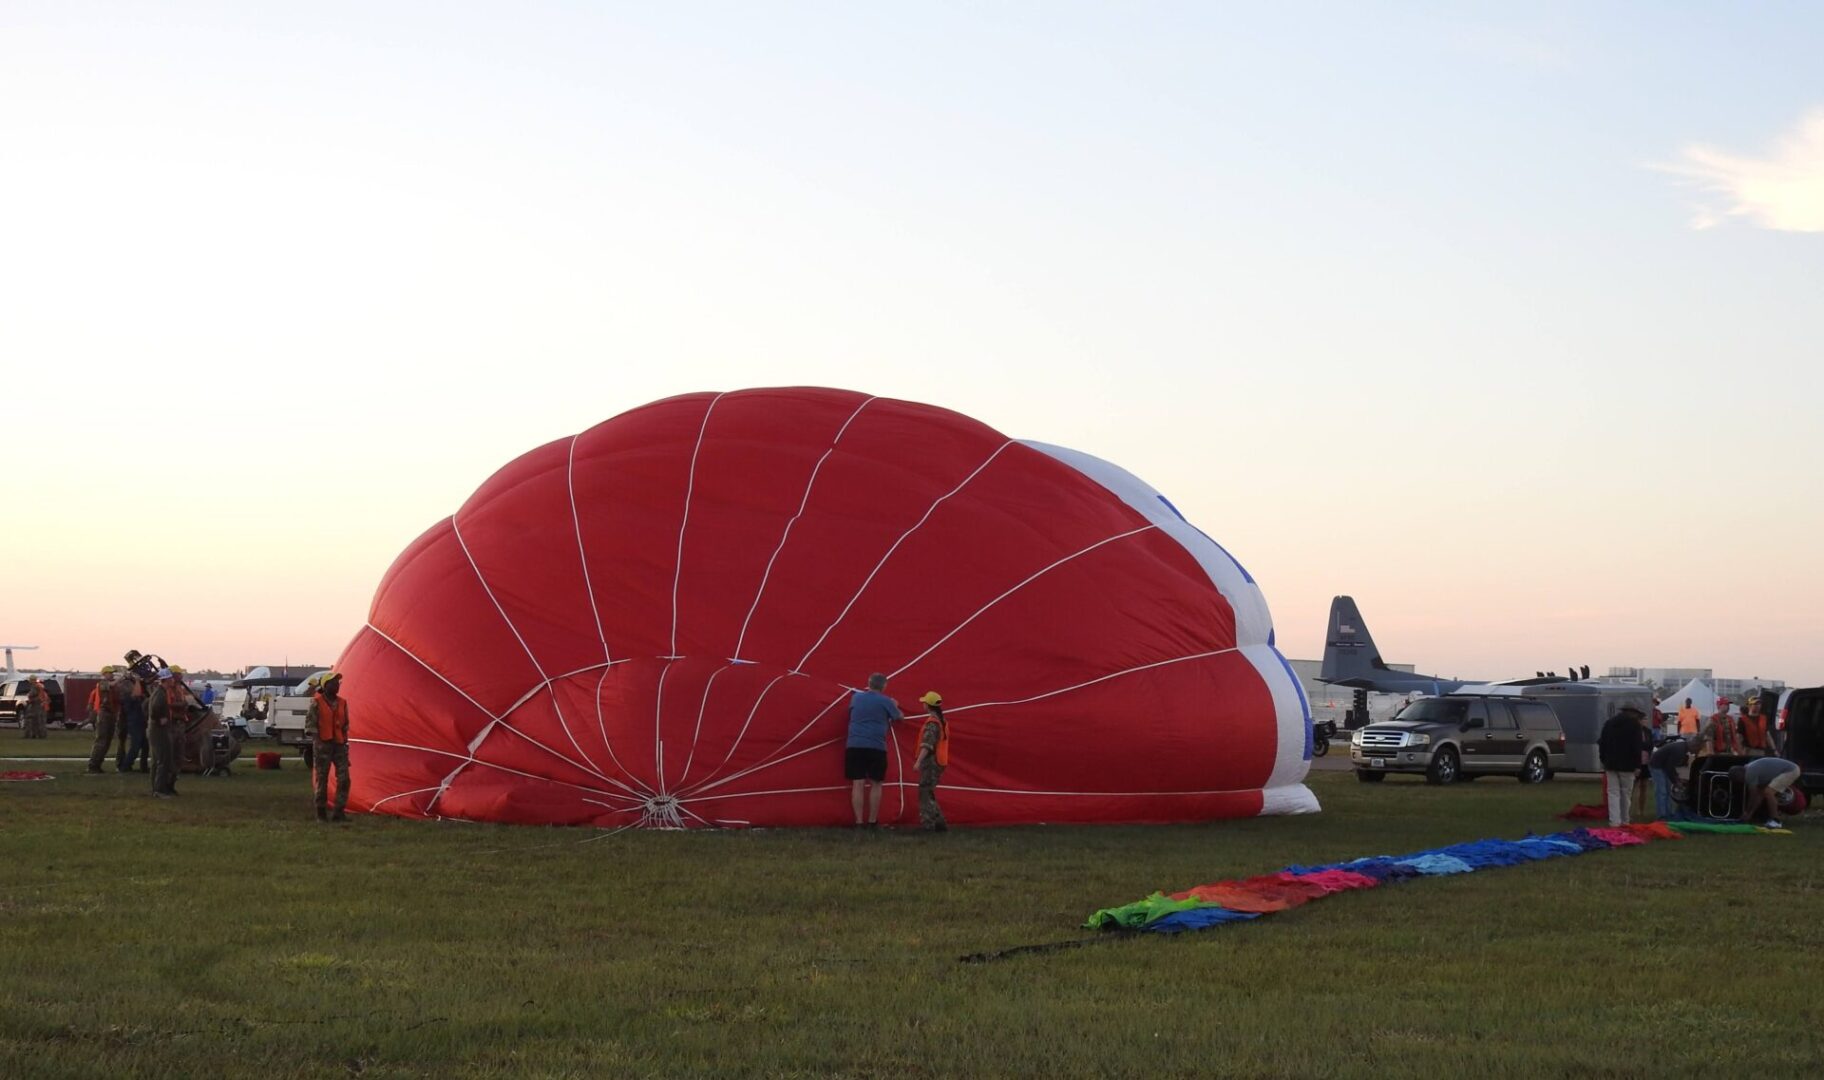 A person standing next to an open parachute.